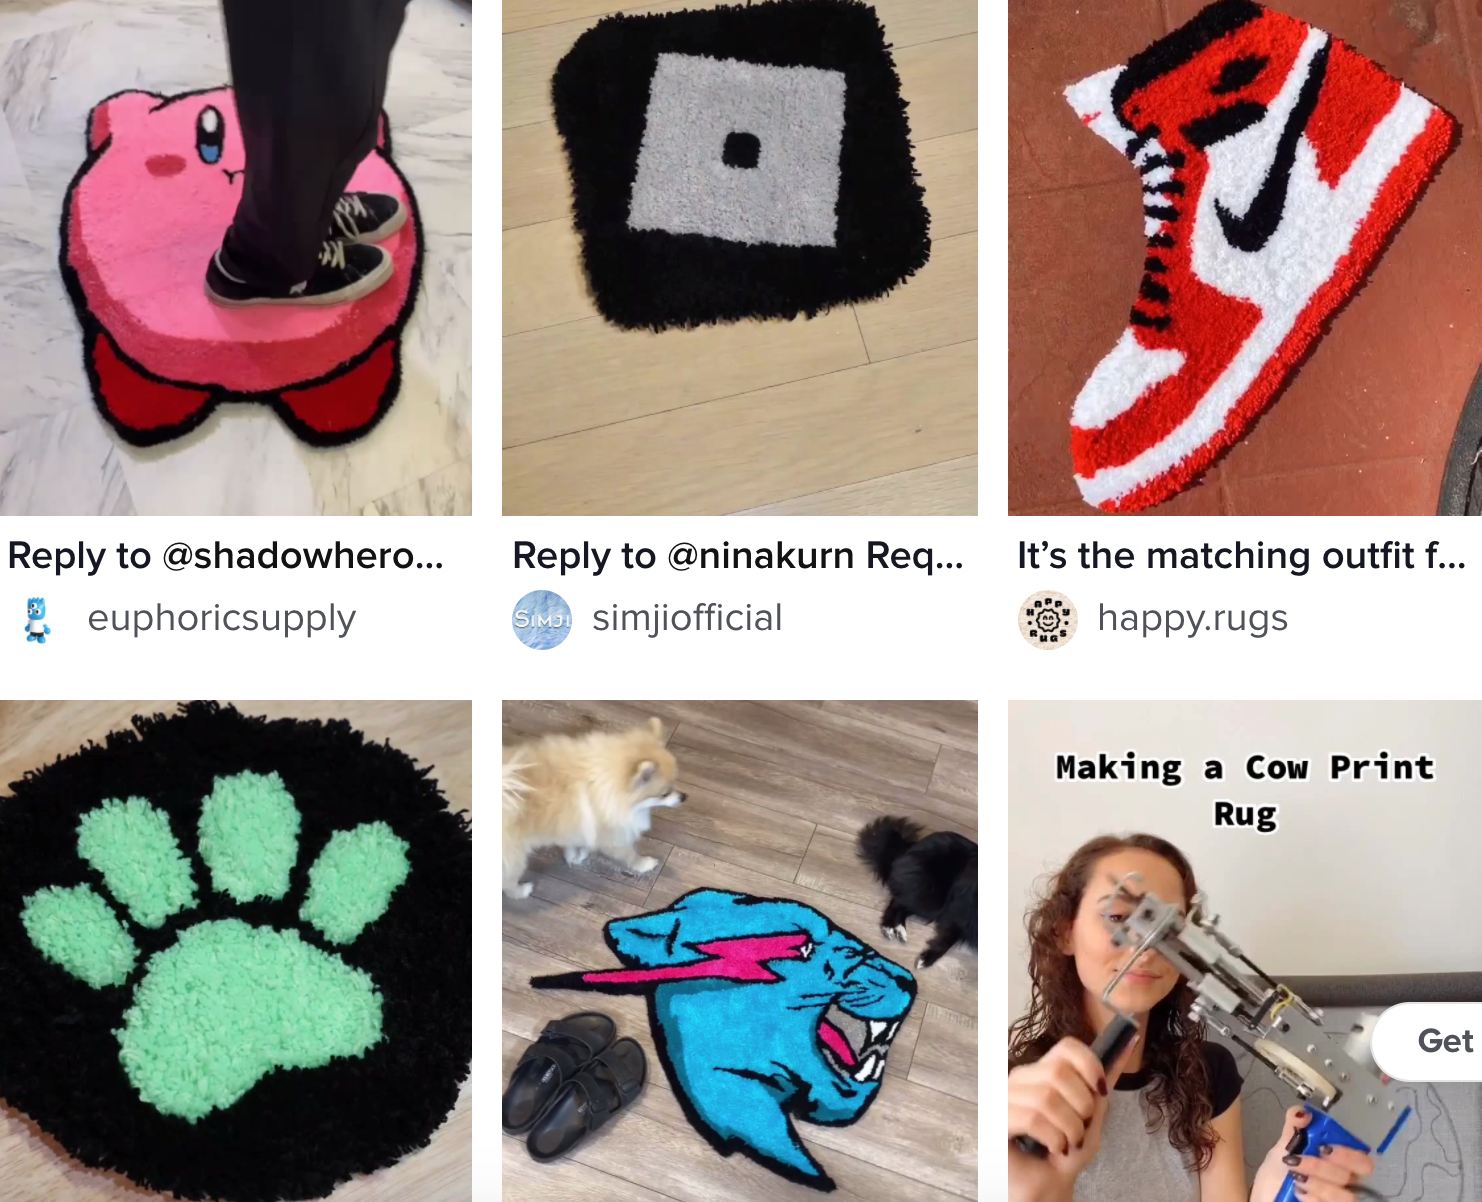 As all these video thumbnails show, TikTok's new DIY tufted rug trend is really taking off. 